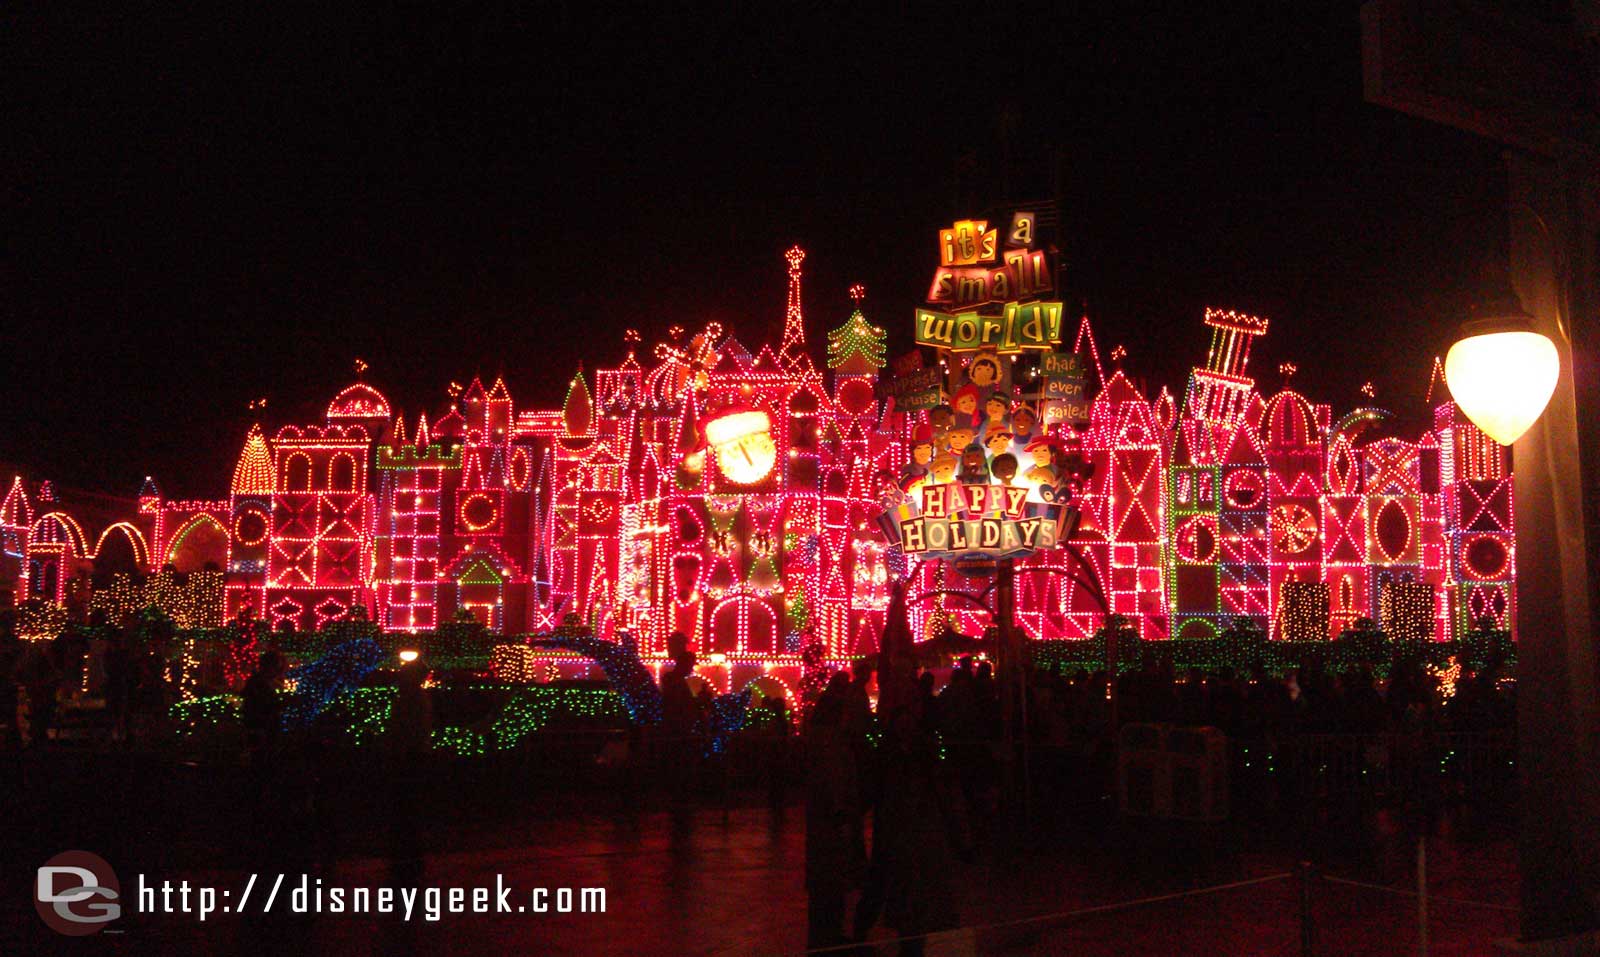 Small World Holiday is open for the season.